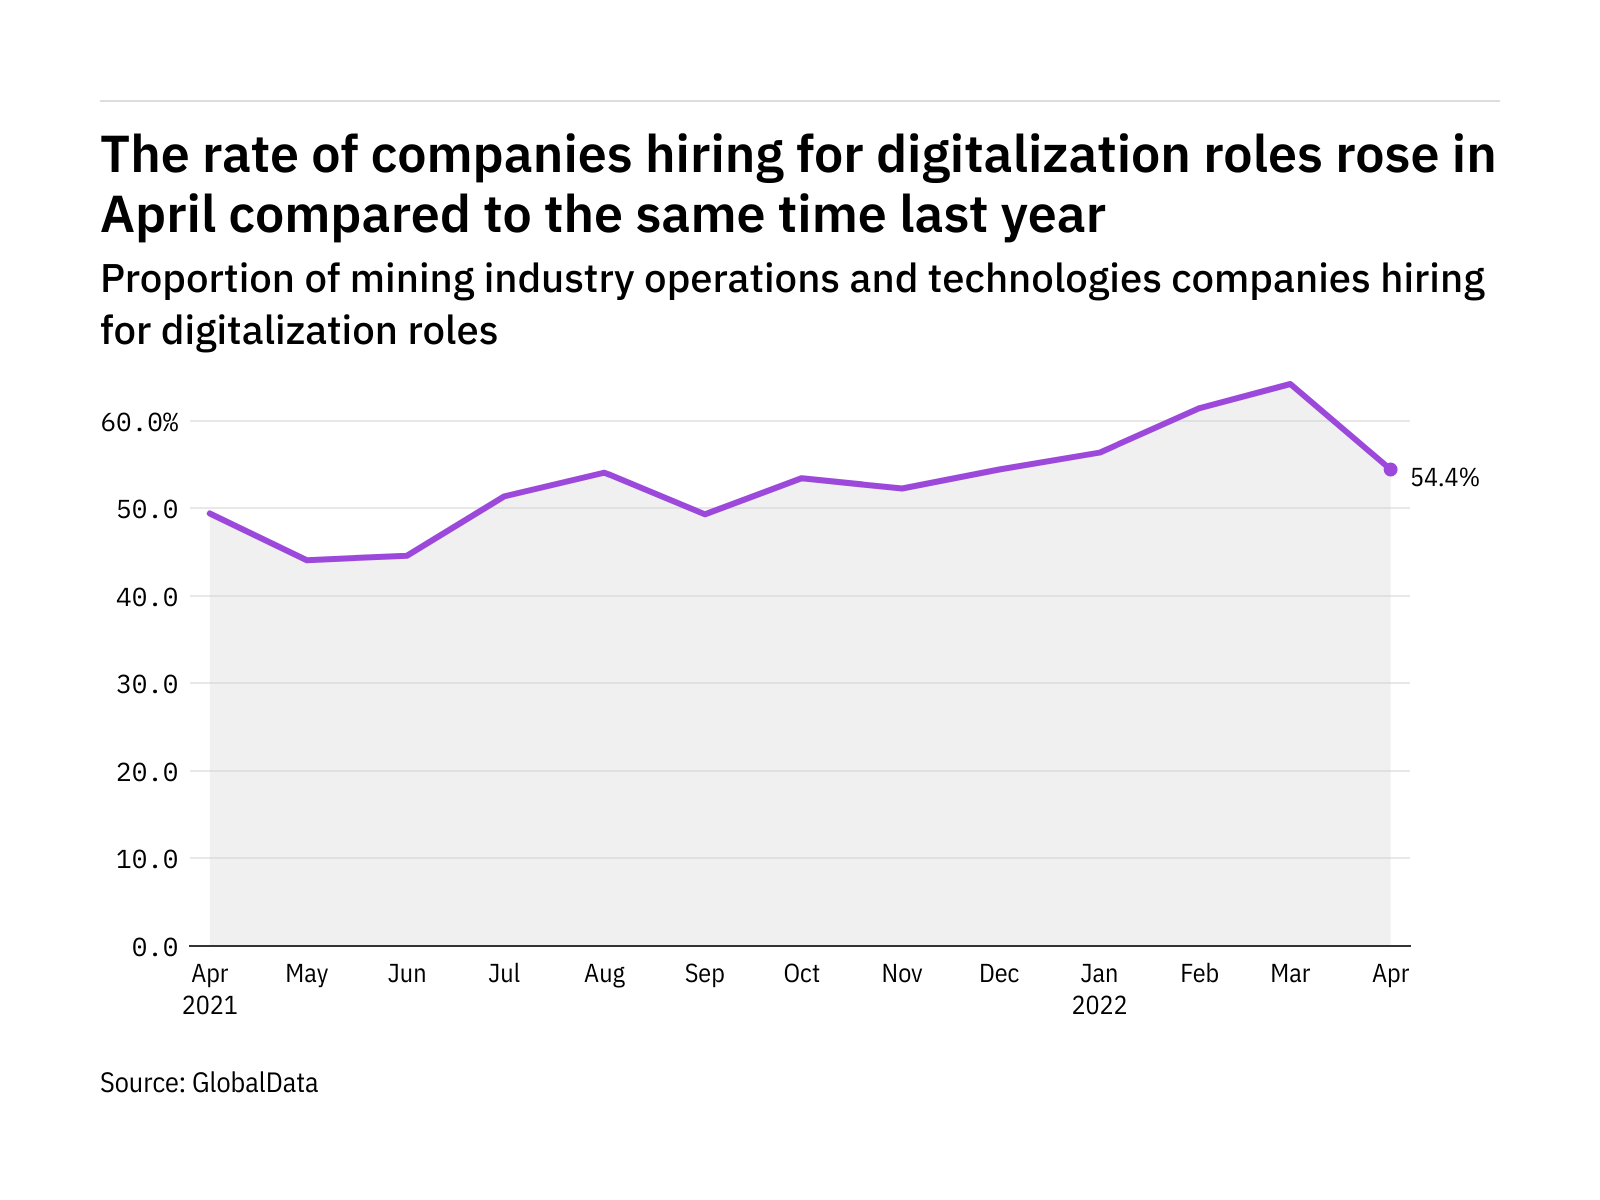 Digitalisation hiring levels in the mining industry rose in April 2022